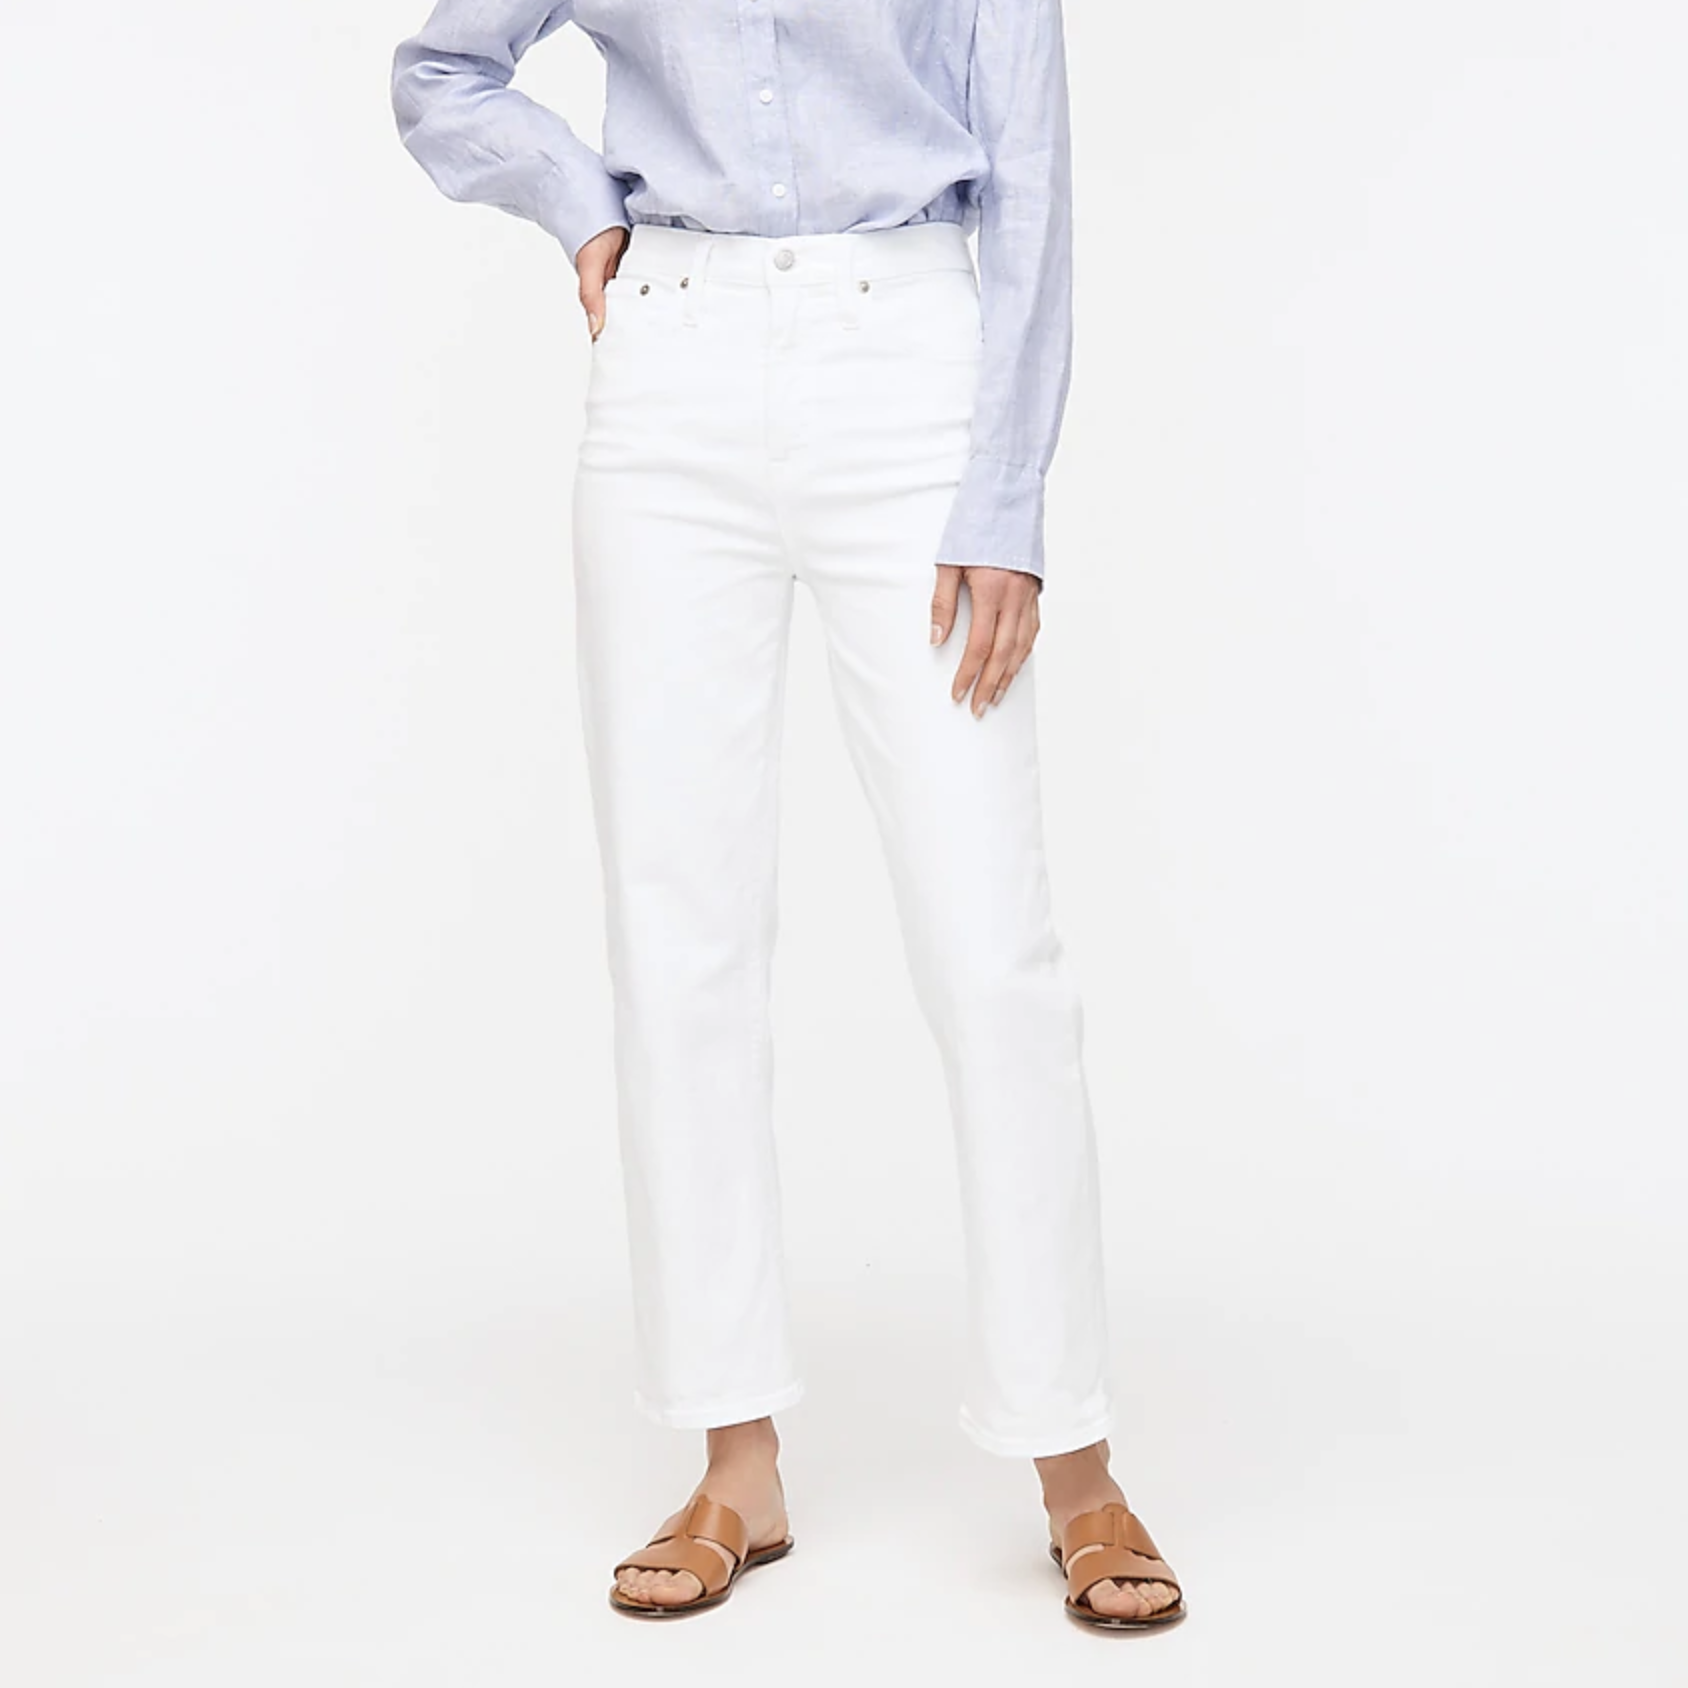 J.Crew Steals | Kelly in the City | Life, Style, and Fashion Blog